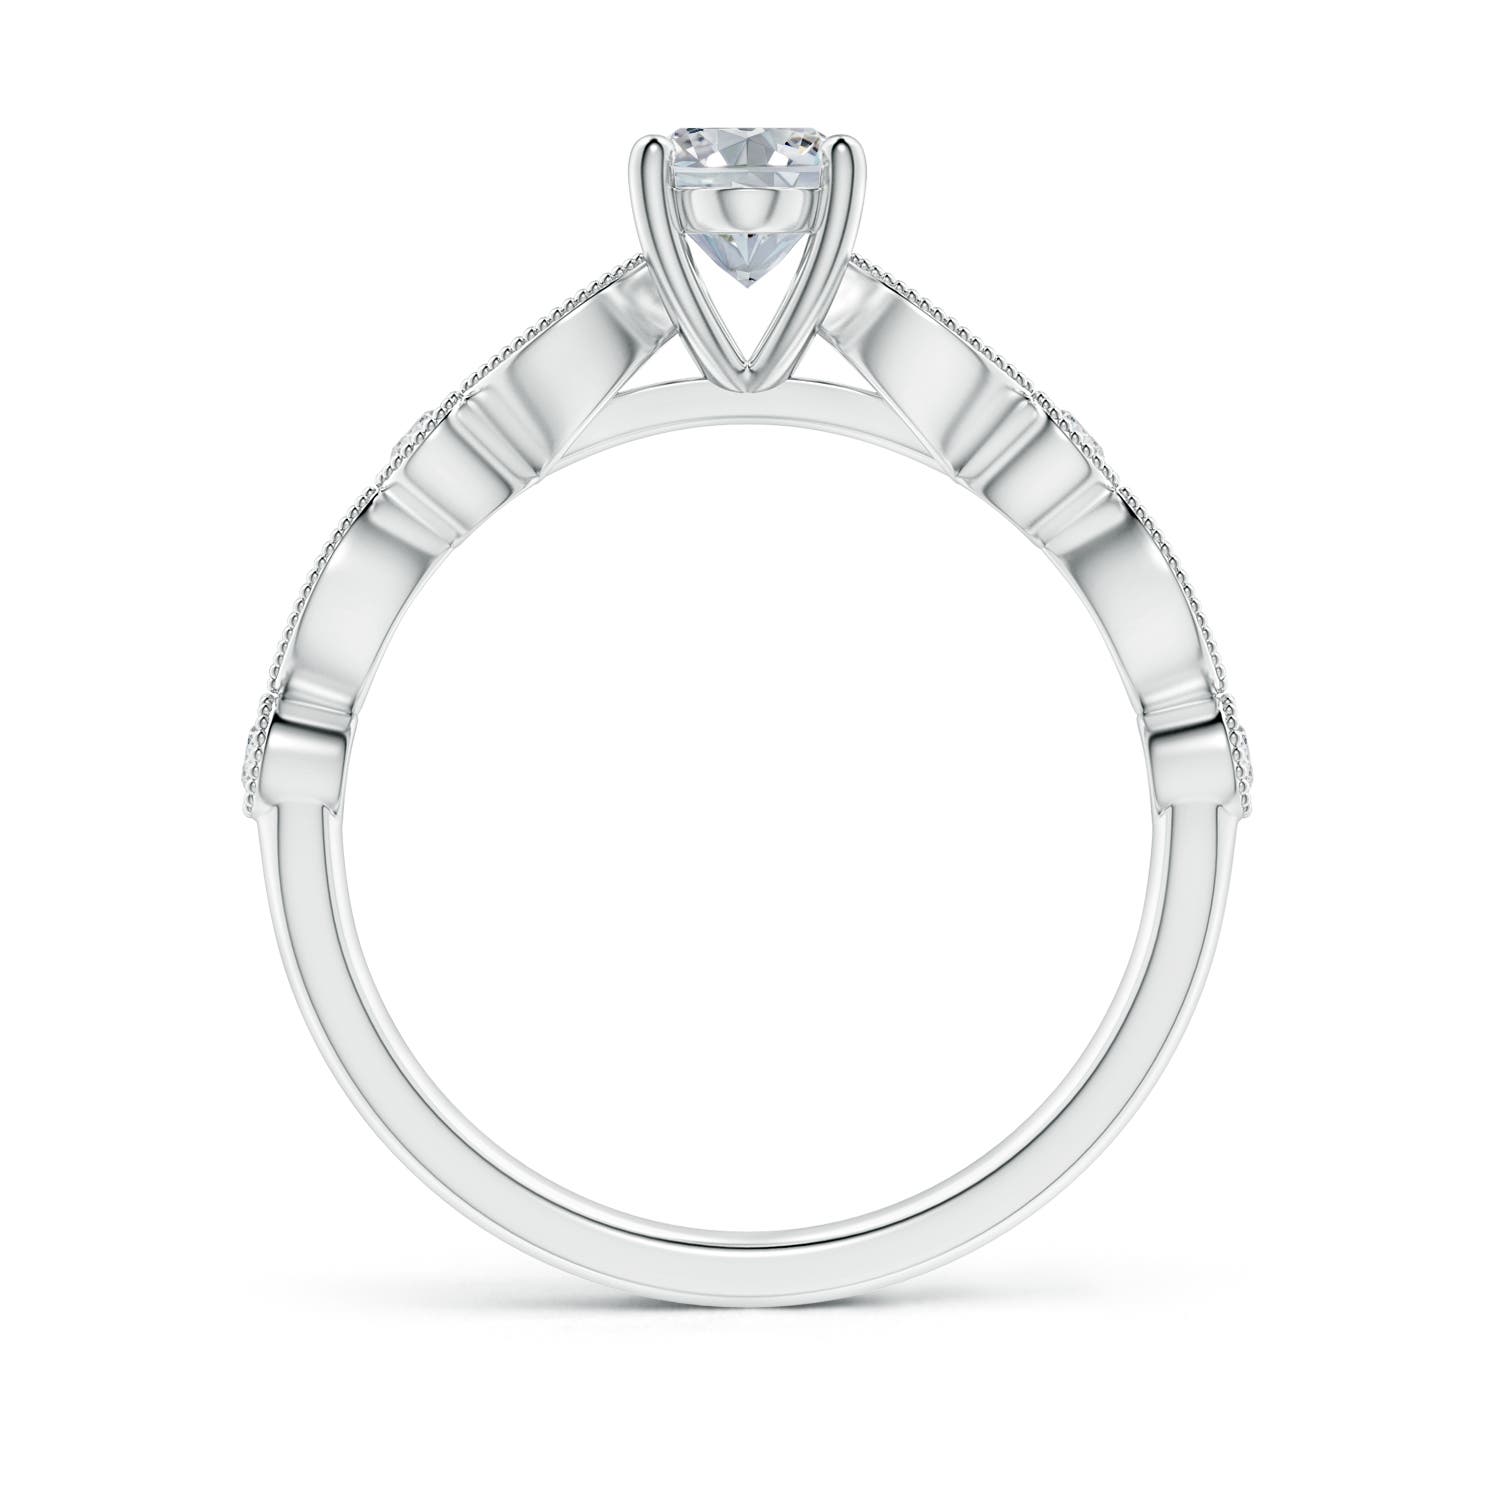 H, SI2 / 0.98 CT / 14 KT White Gold